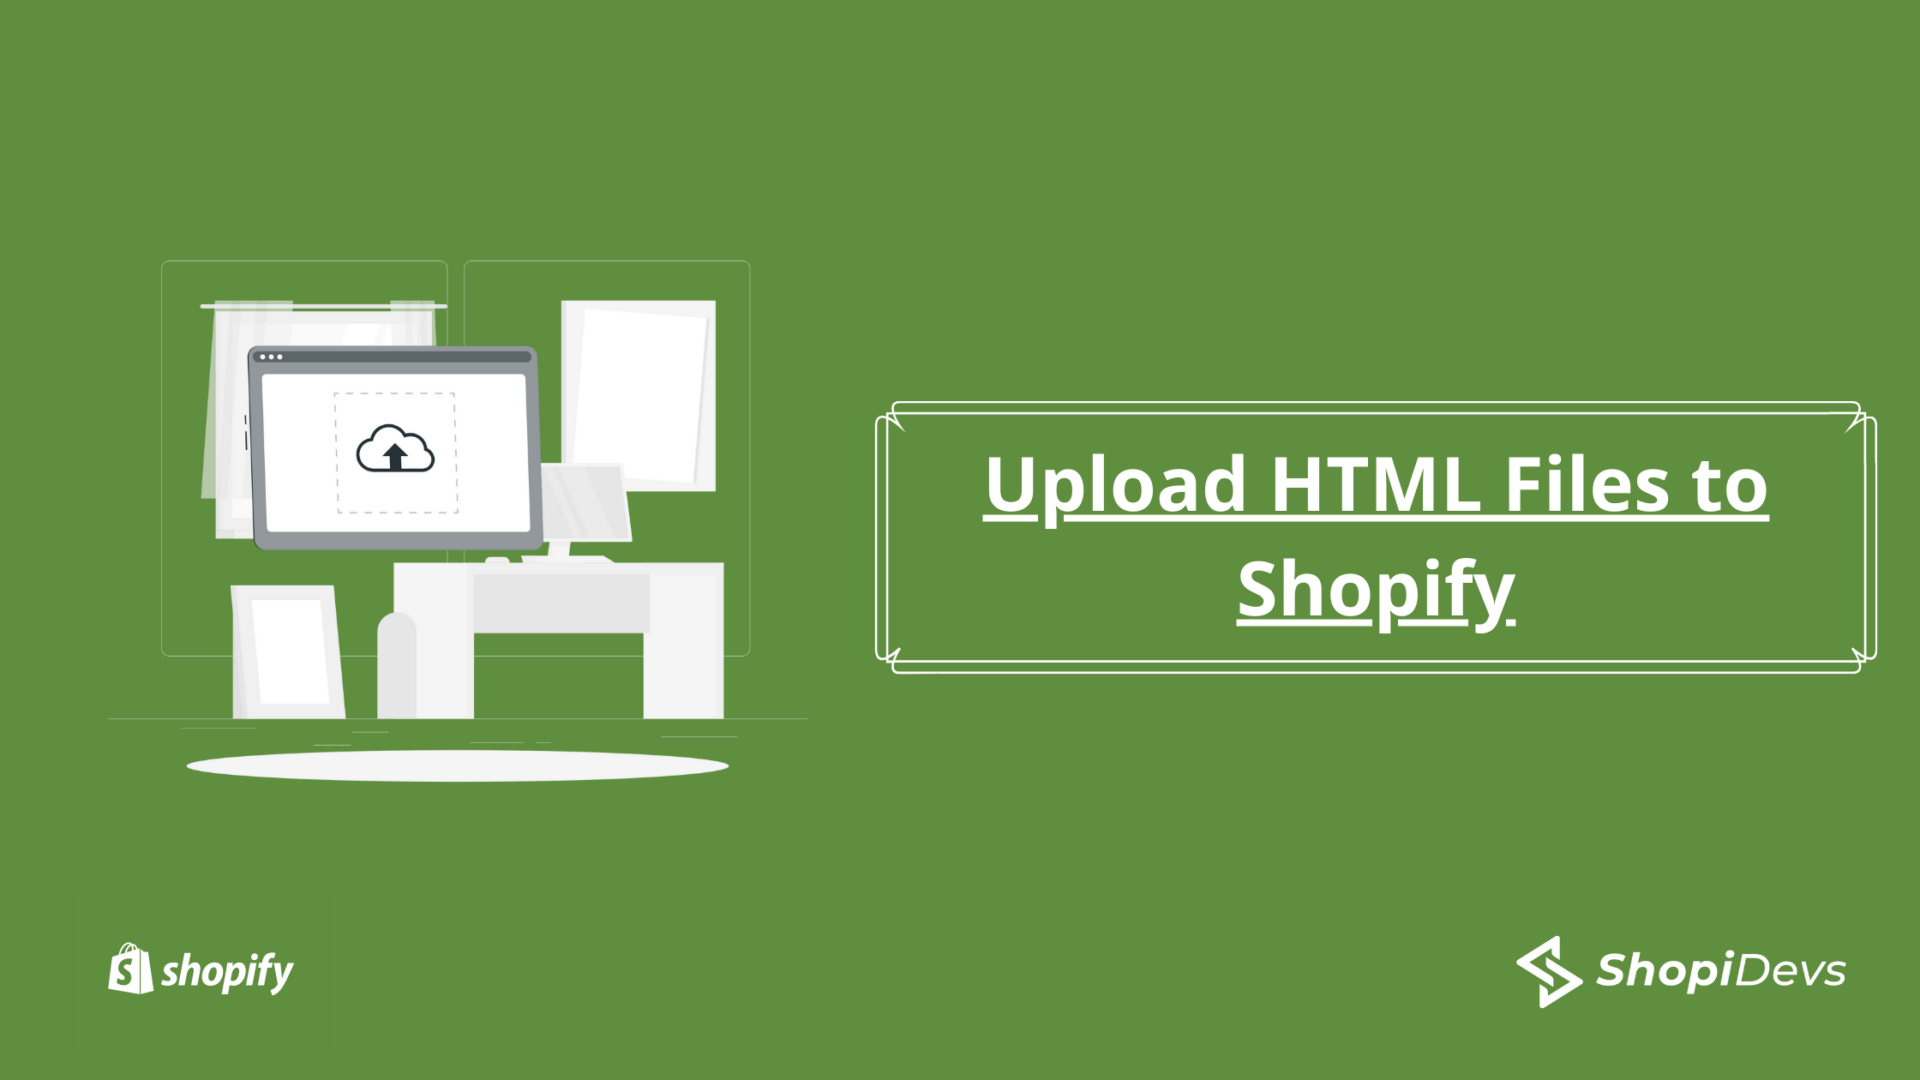 Upload HTML Files to Shopify